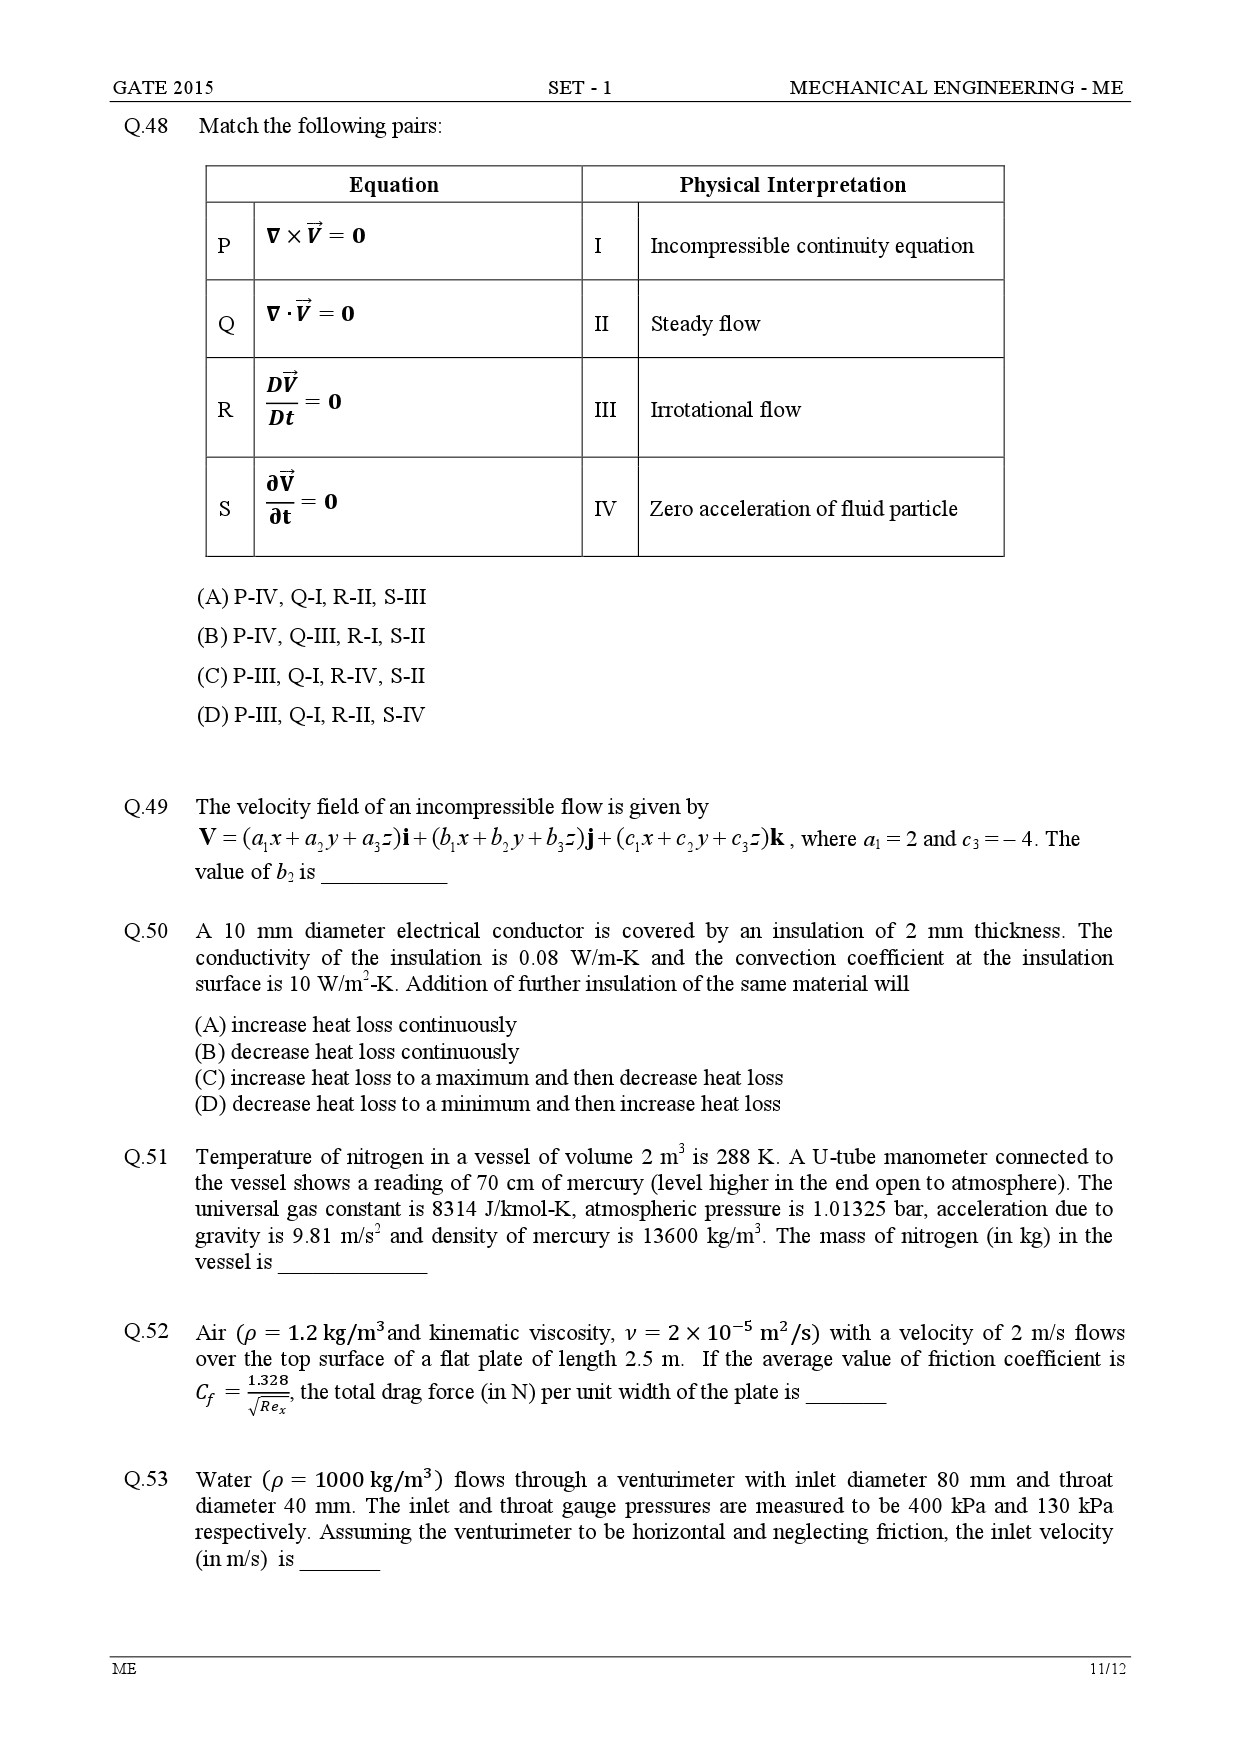 GATE Exam Question Paper 2015 Mechanical Engineering Set 1 11